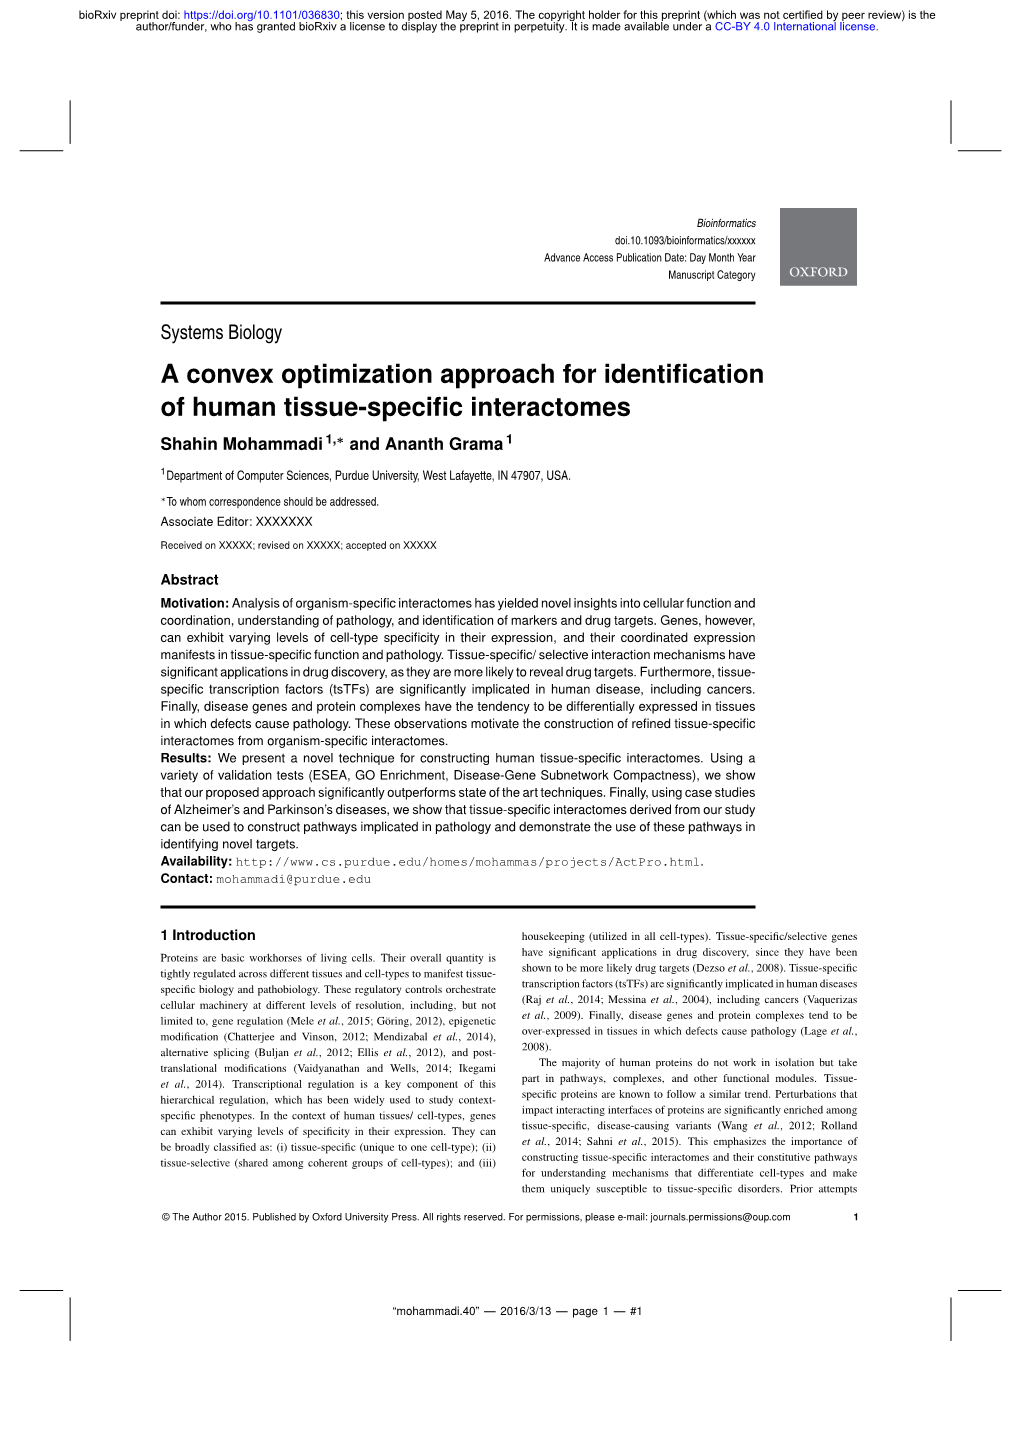 A Convex Optimization Approach for Identification of Human Tissue